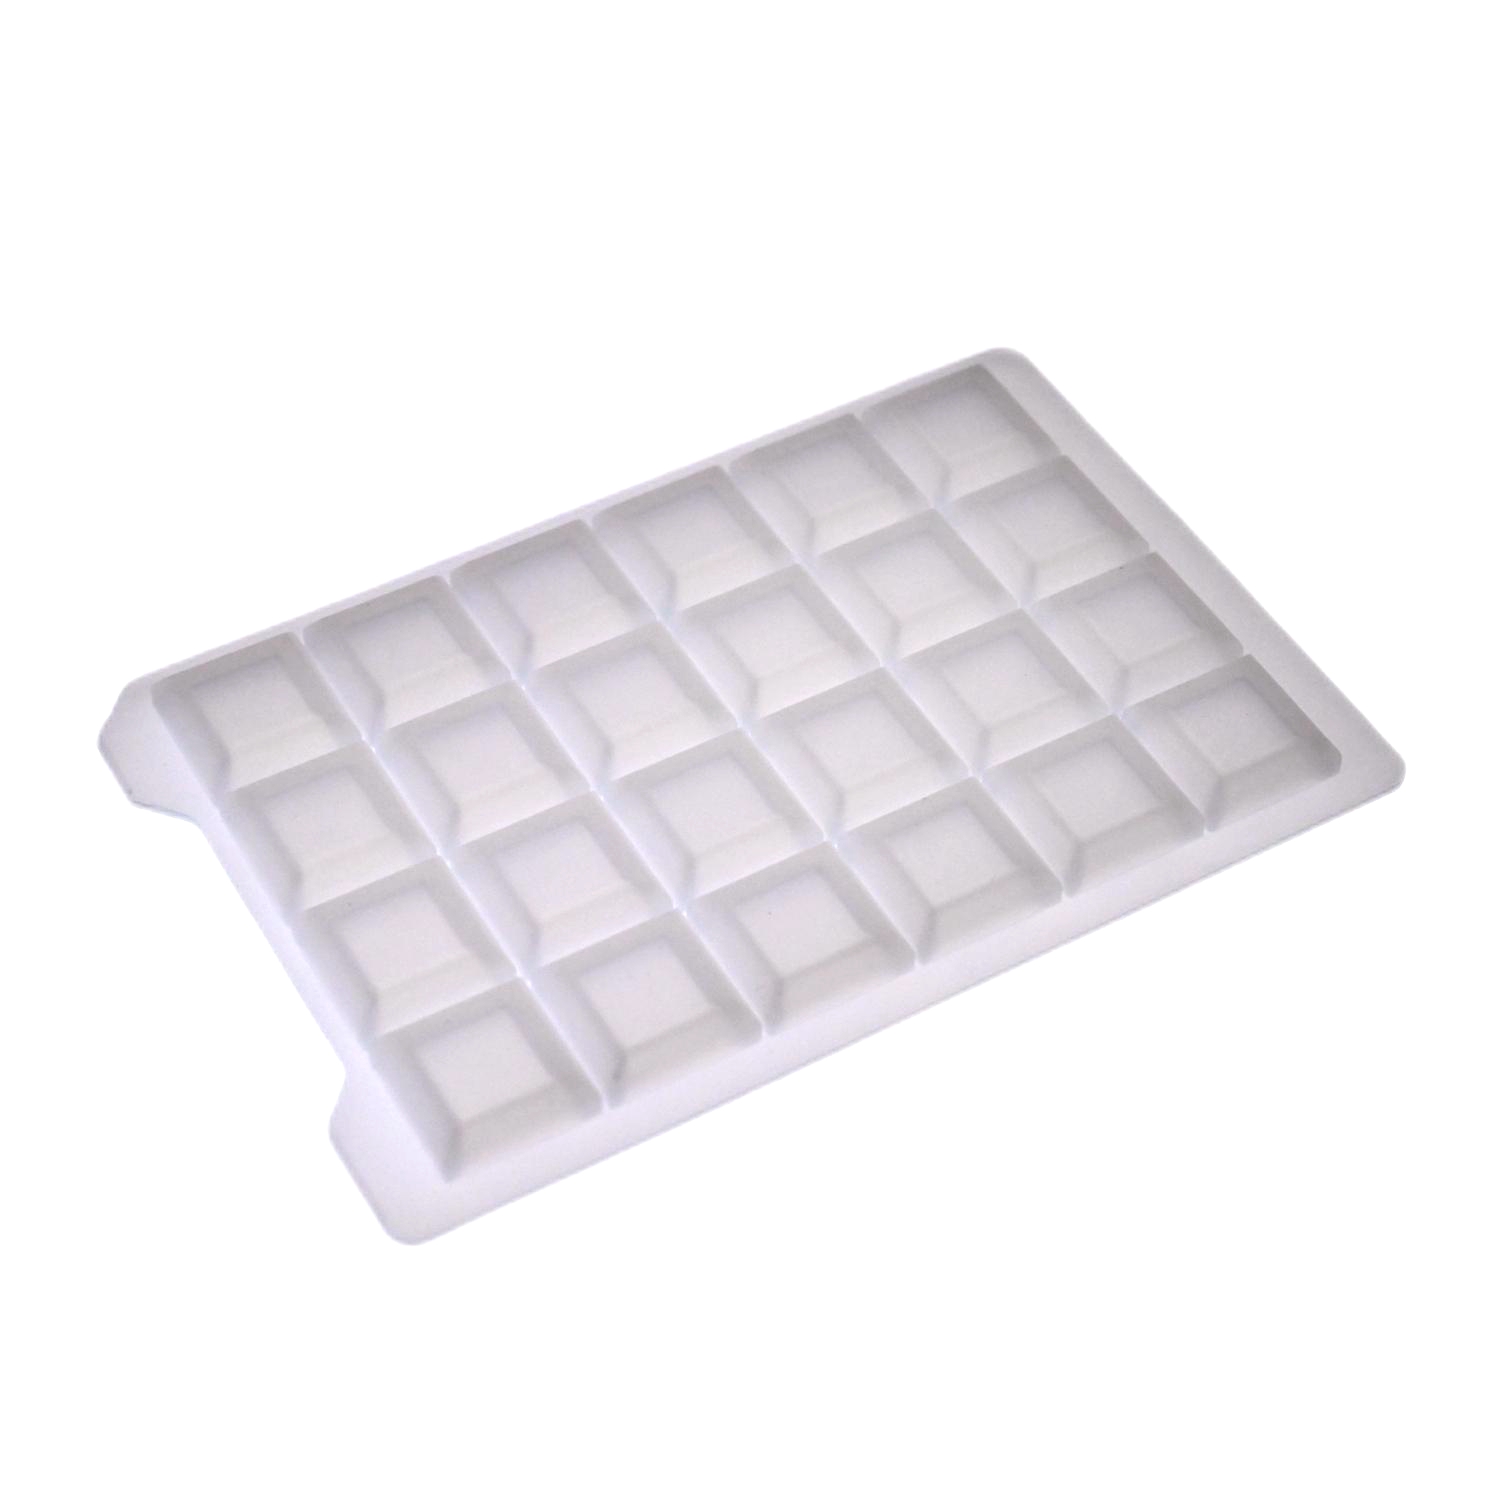 24 well silicone sealing mat (2)